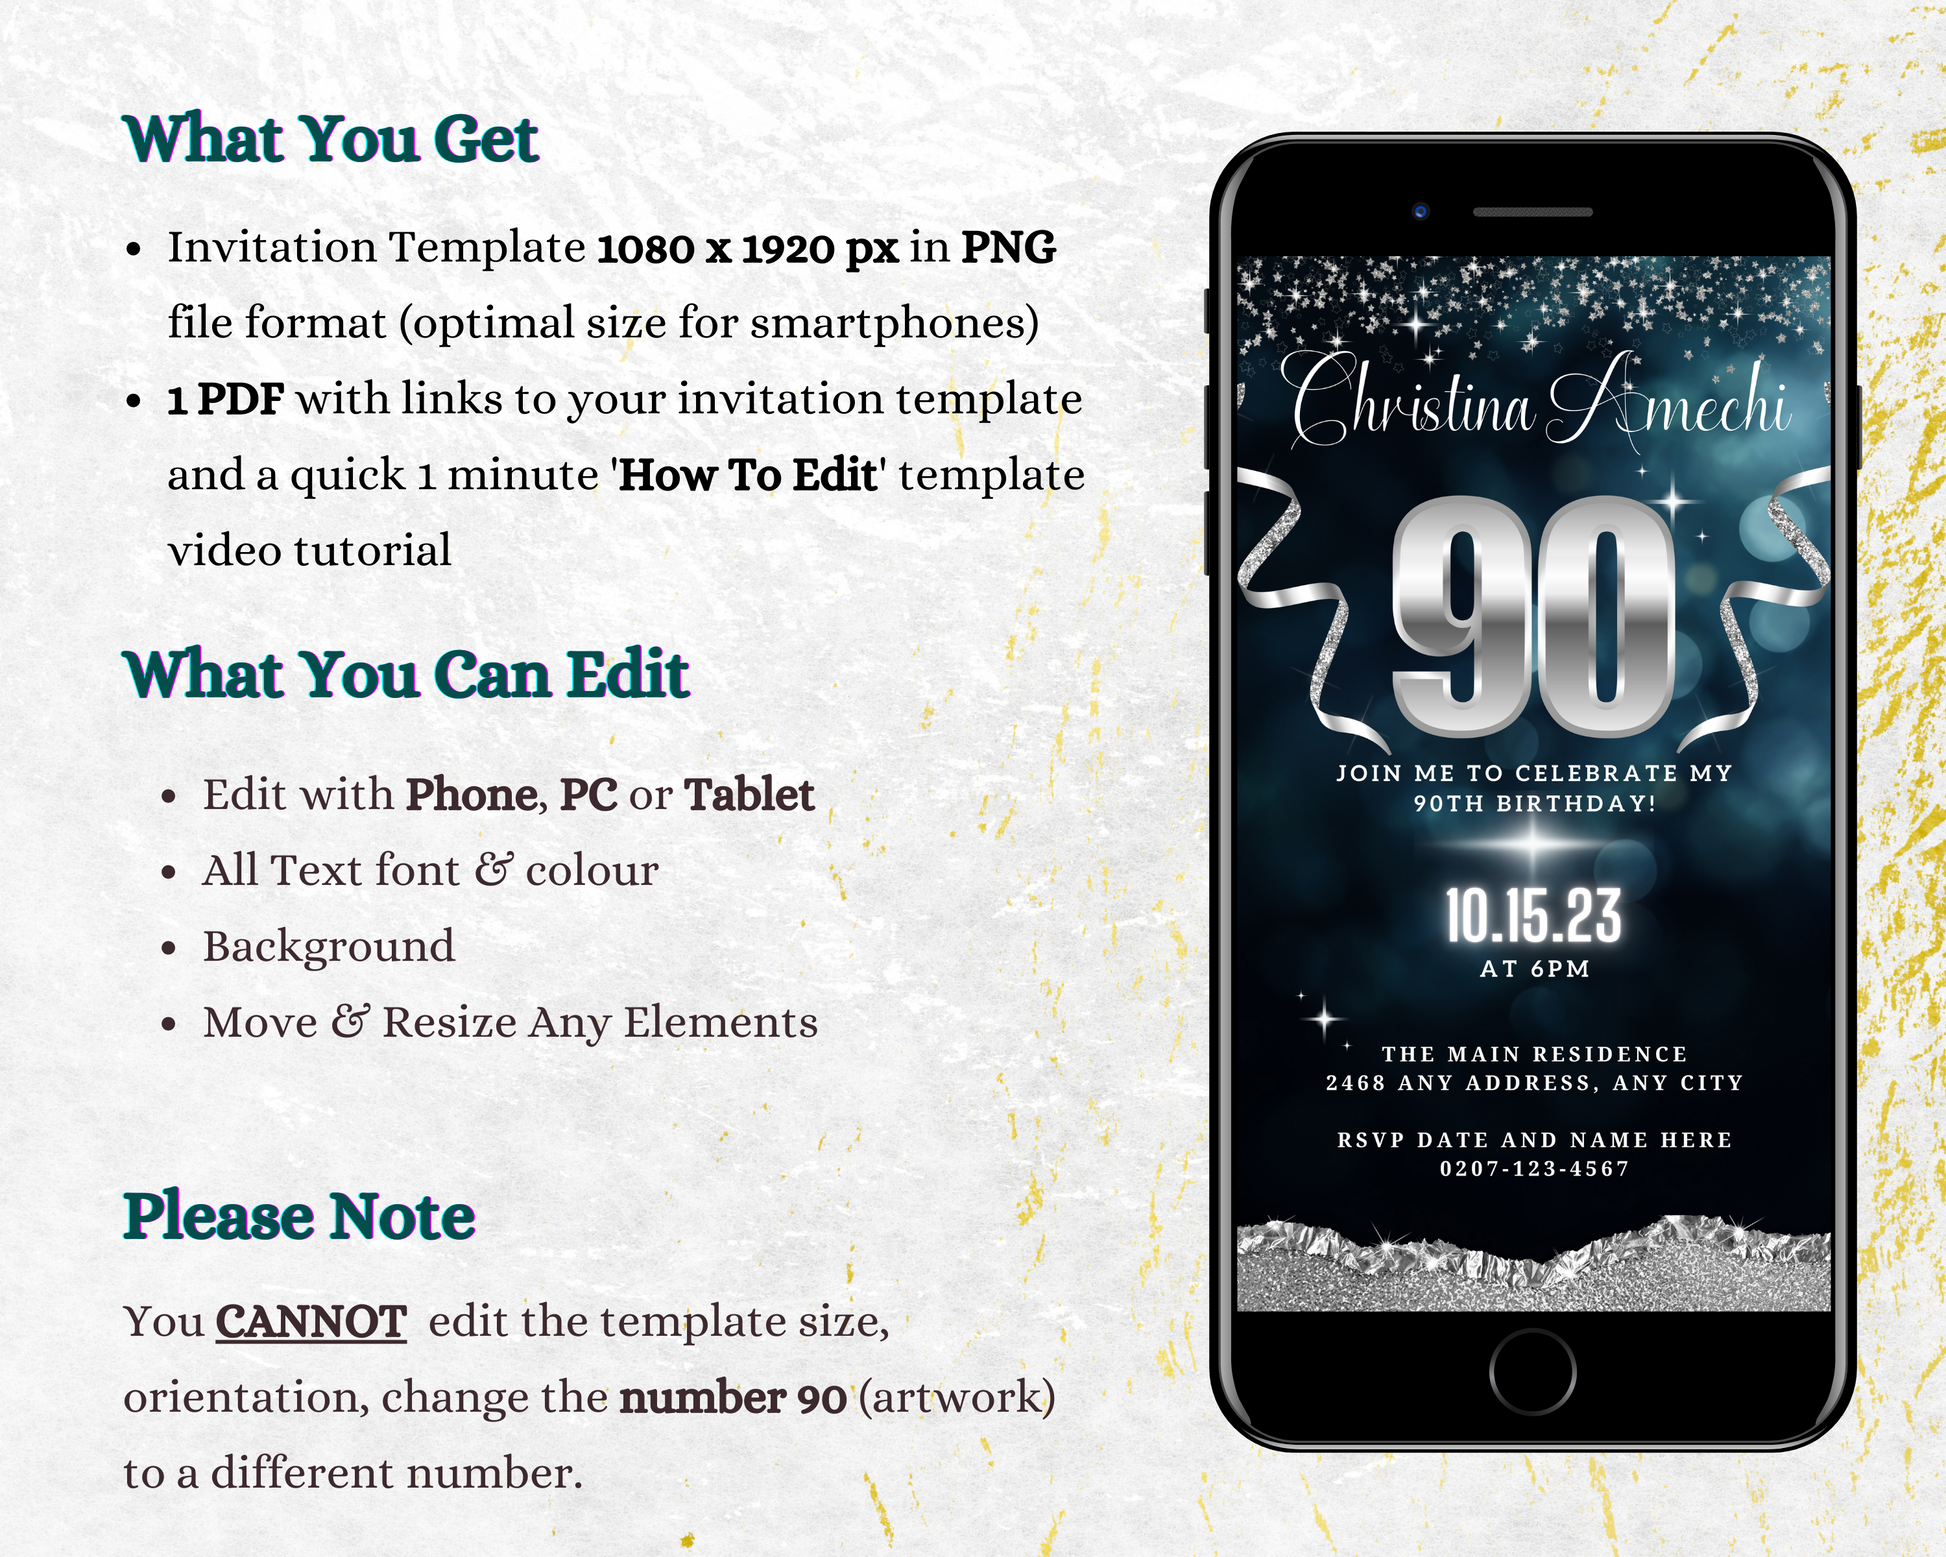 Customizable Digital Navy Blue Silver Glitter 90th Birthday Evite displayed on a smartphone screen, featuring editable text and a note, perfect for easy personalization and electronic sharing.